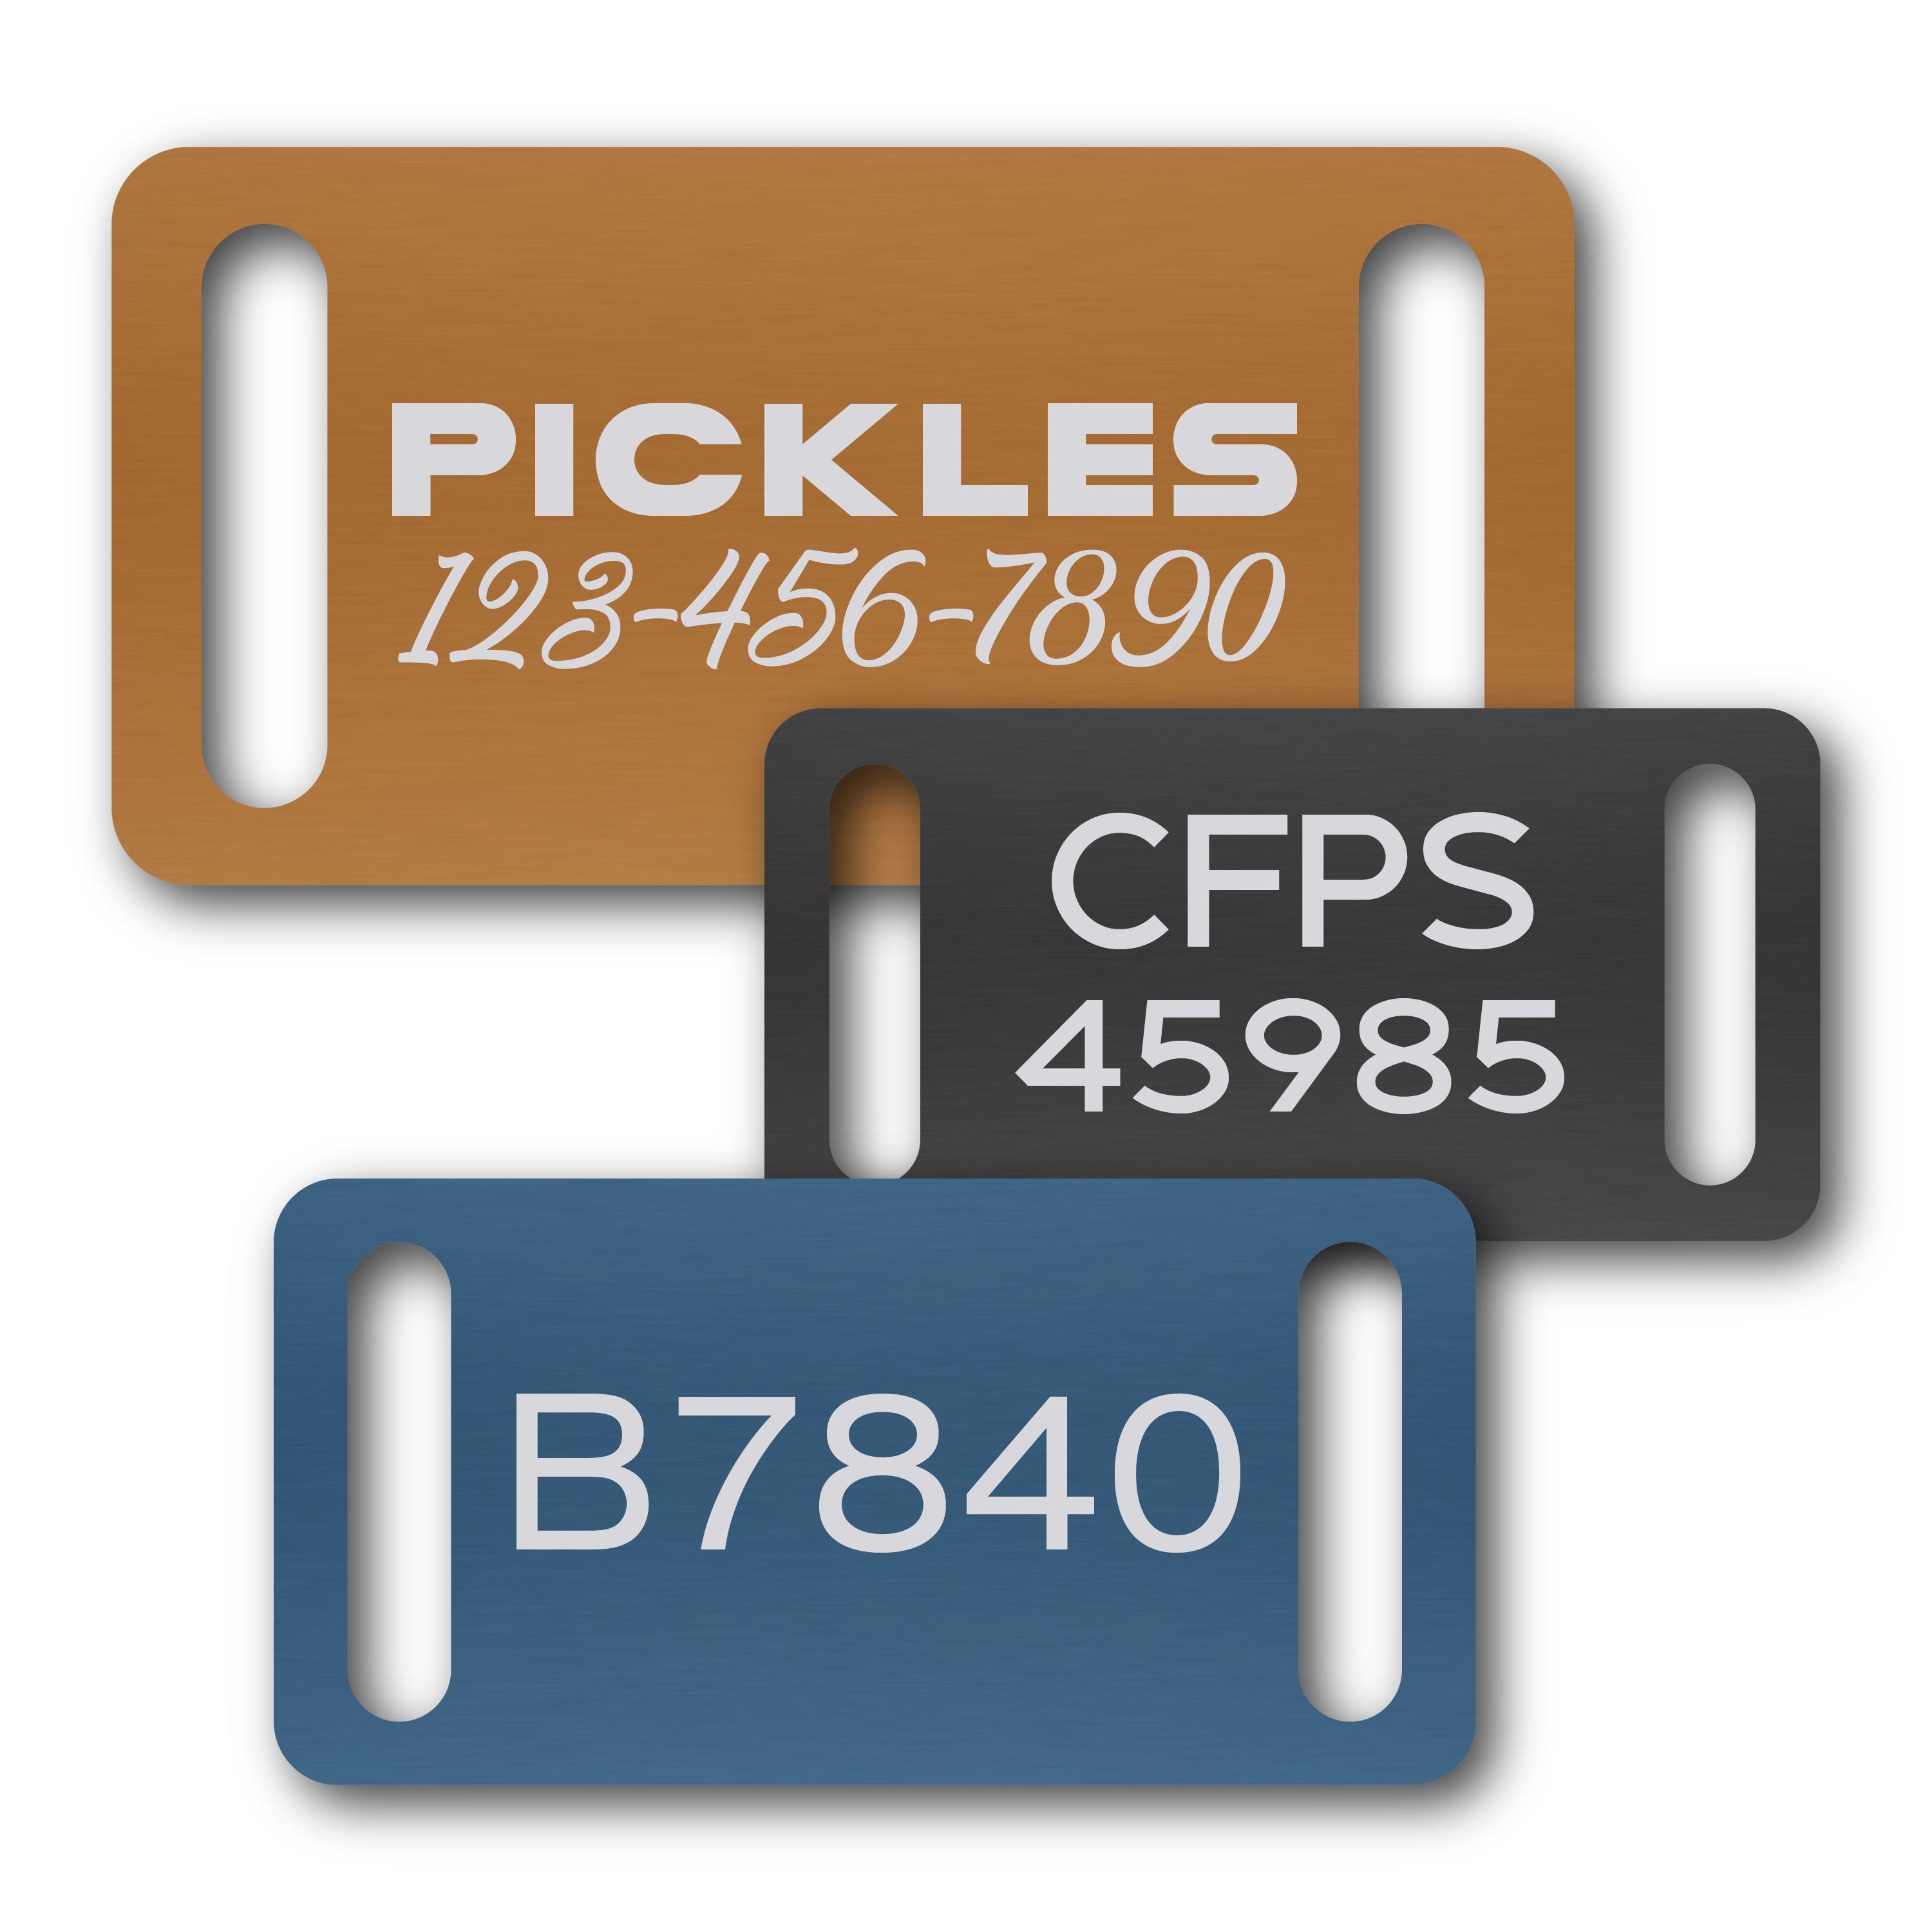 Anodized Aluminum Rectangle Slide-On Tags, 7/8 x 1-3/4 with 5/32 x